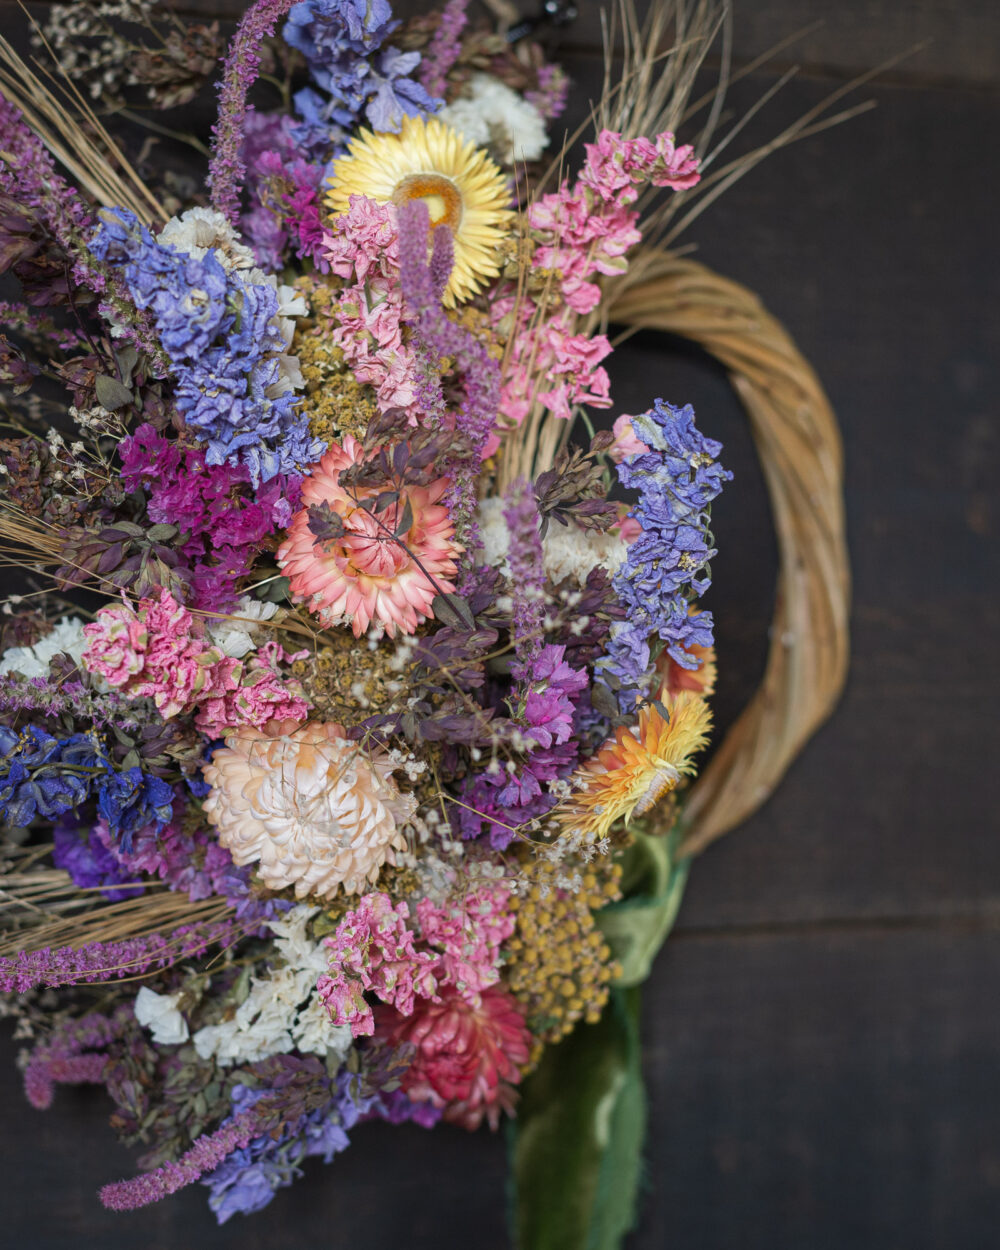 Naturally dyed dried flowers